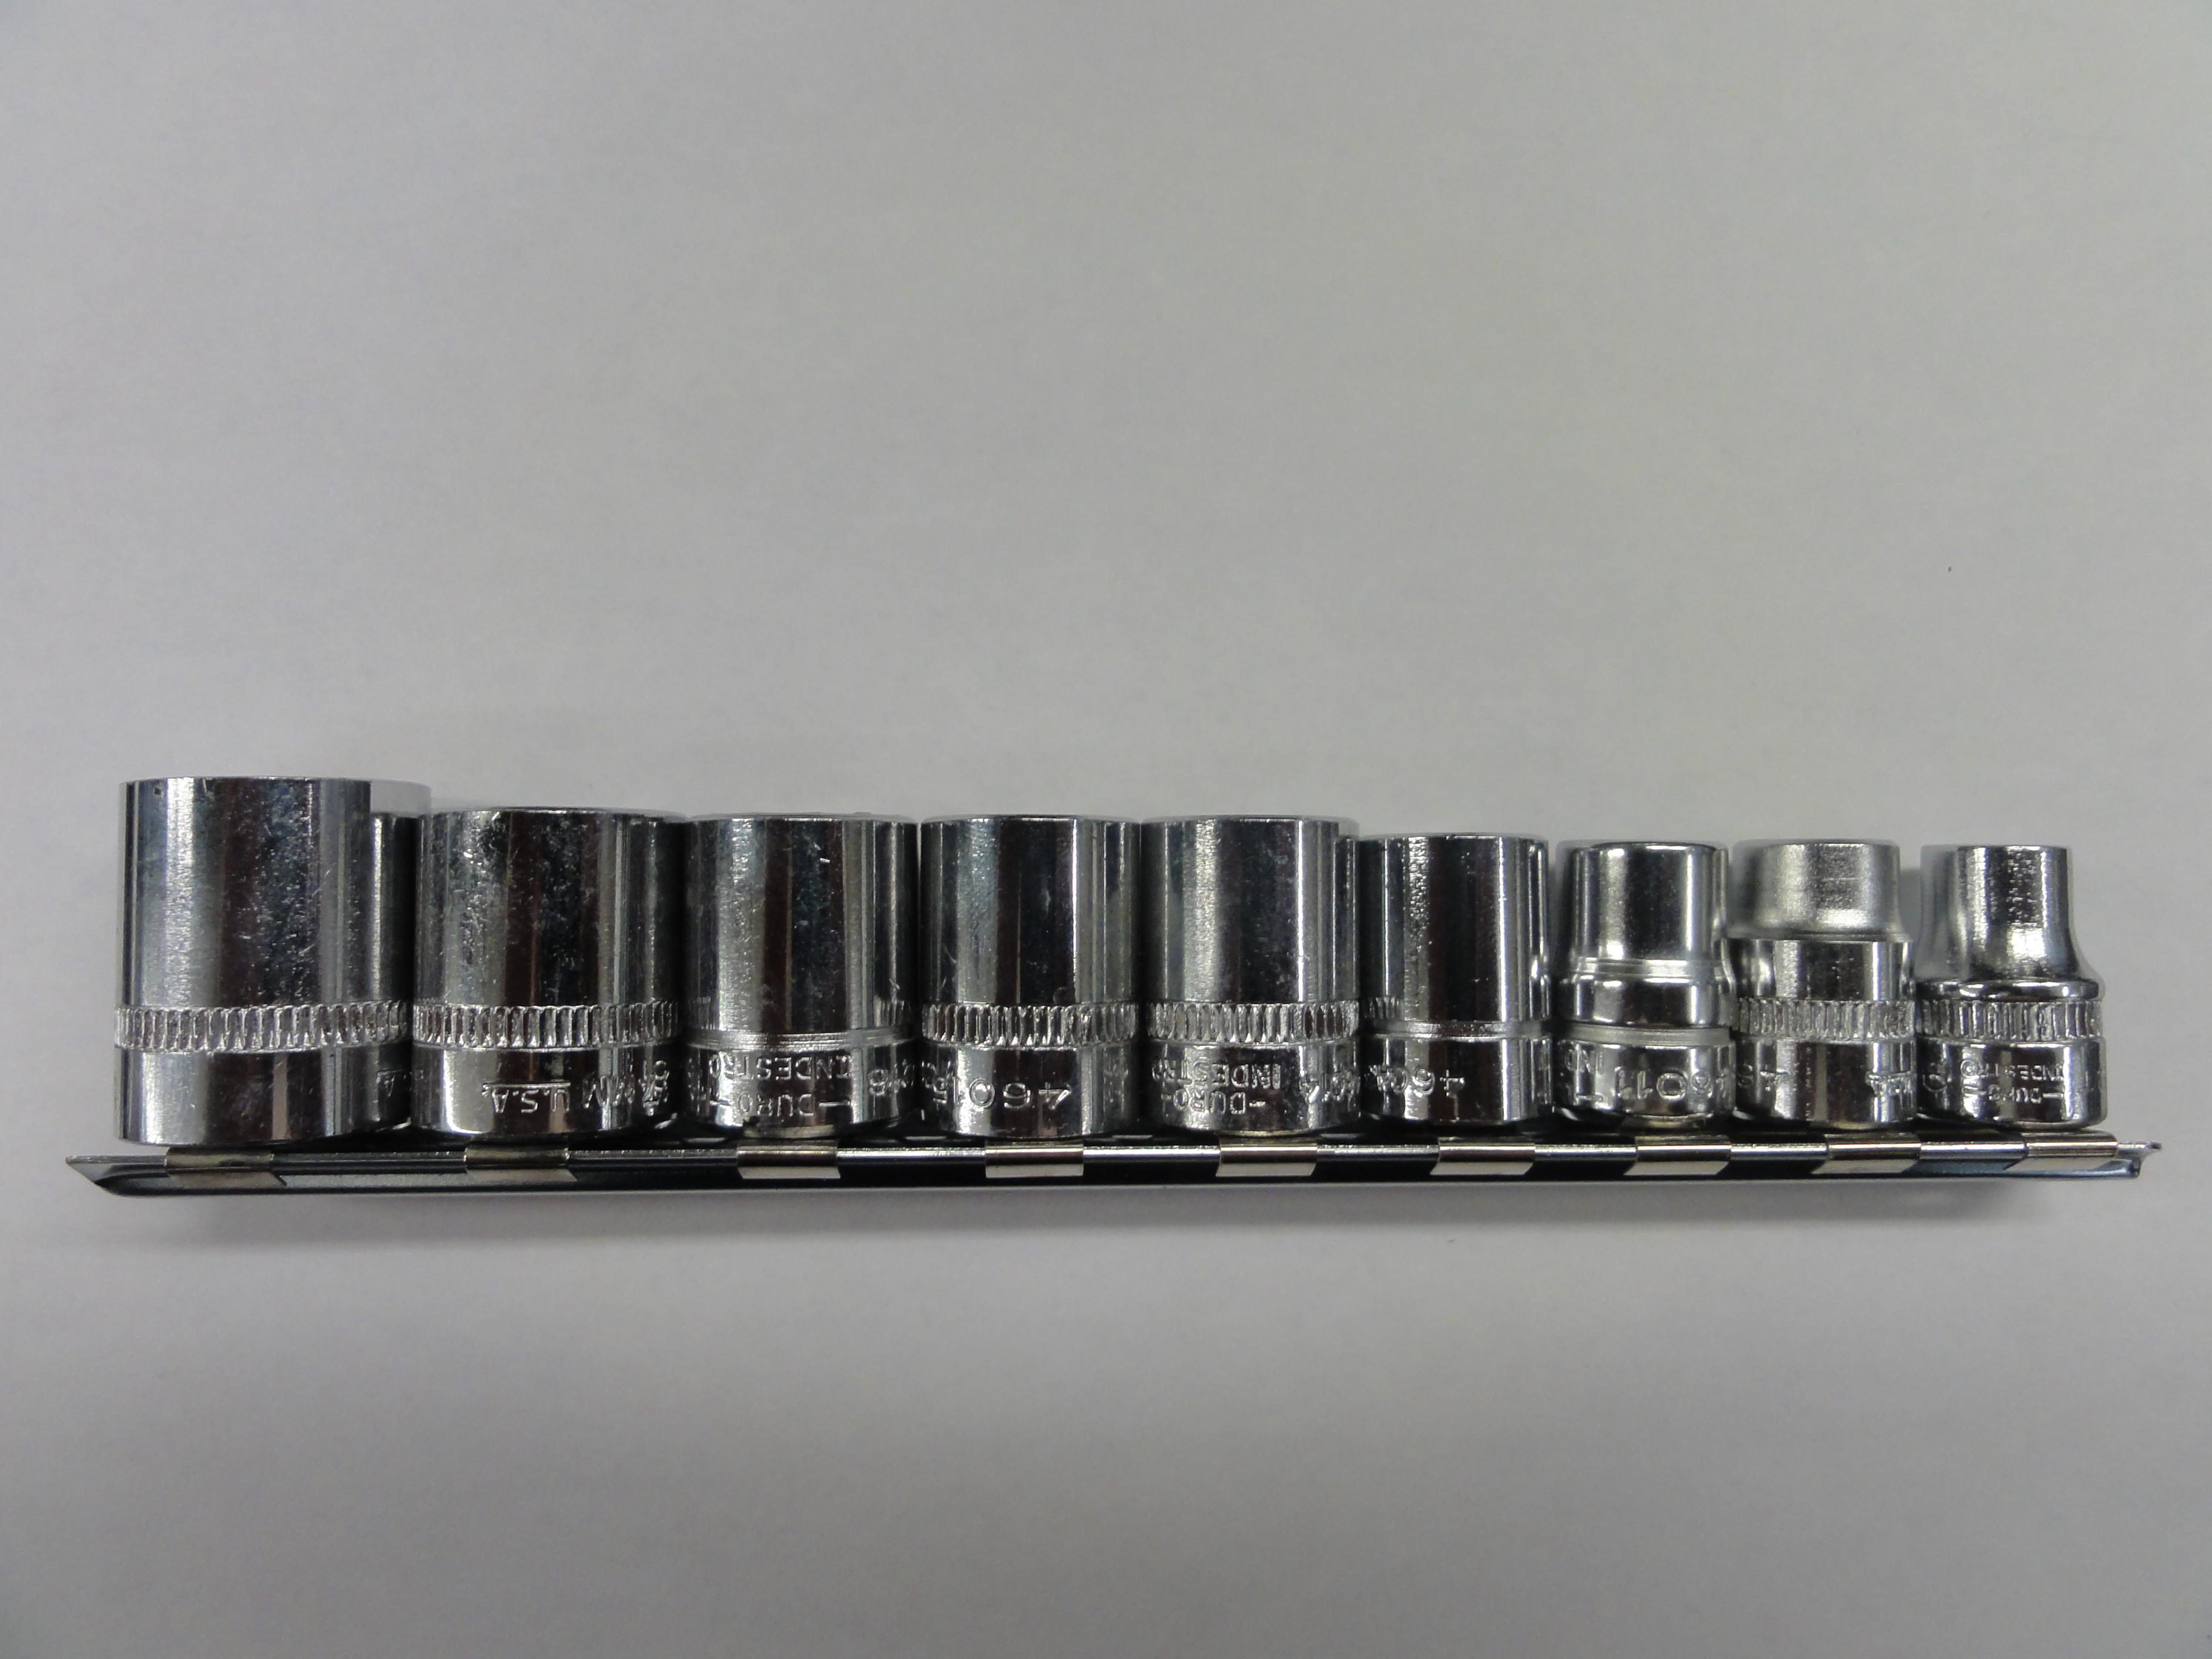 DURO 3/8" Dr. 12 pt Metric Chrome Socket Set 9 MM to 19 MM Made in U.S.A.